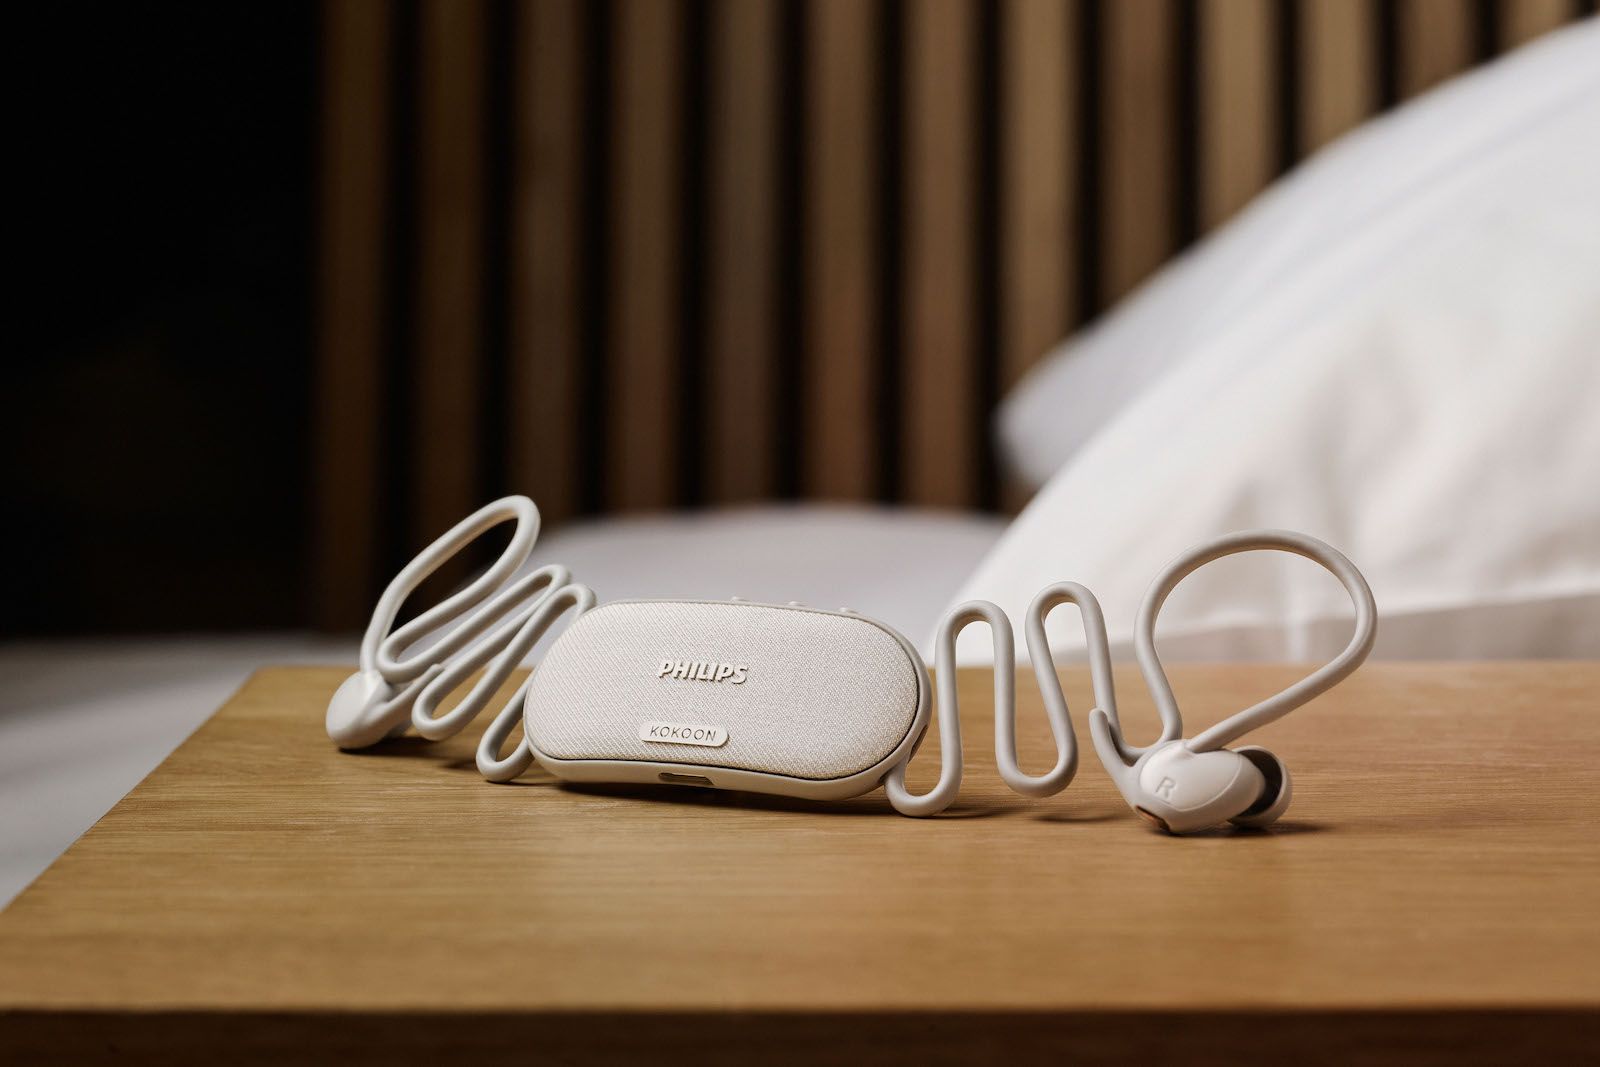 Philips Kokoon sleep headphones are designed to help you get a better night's rest